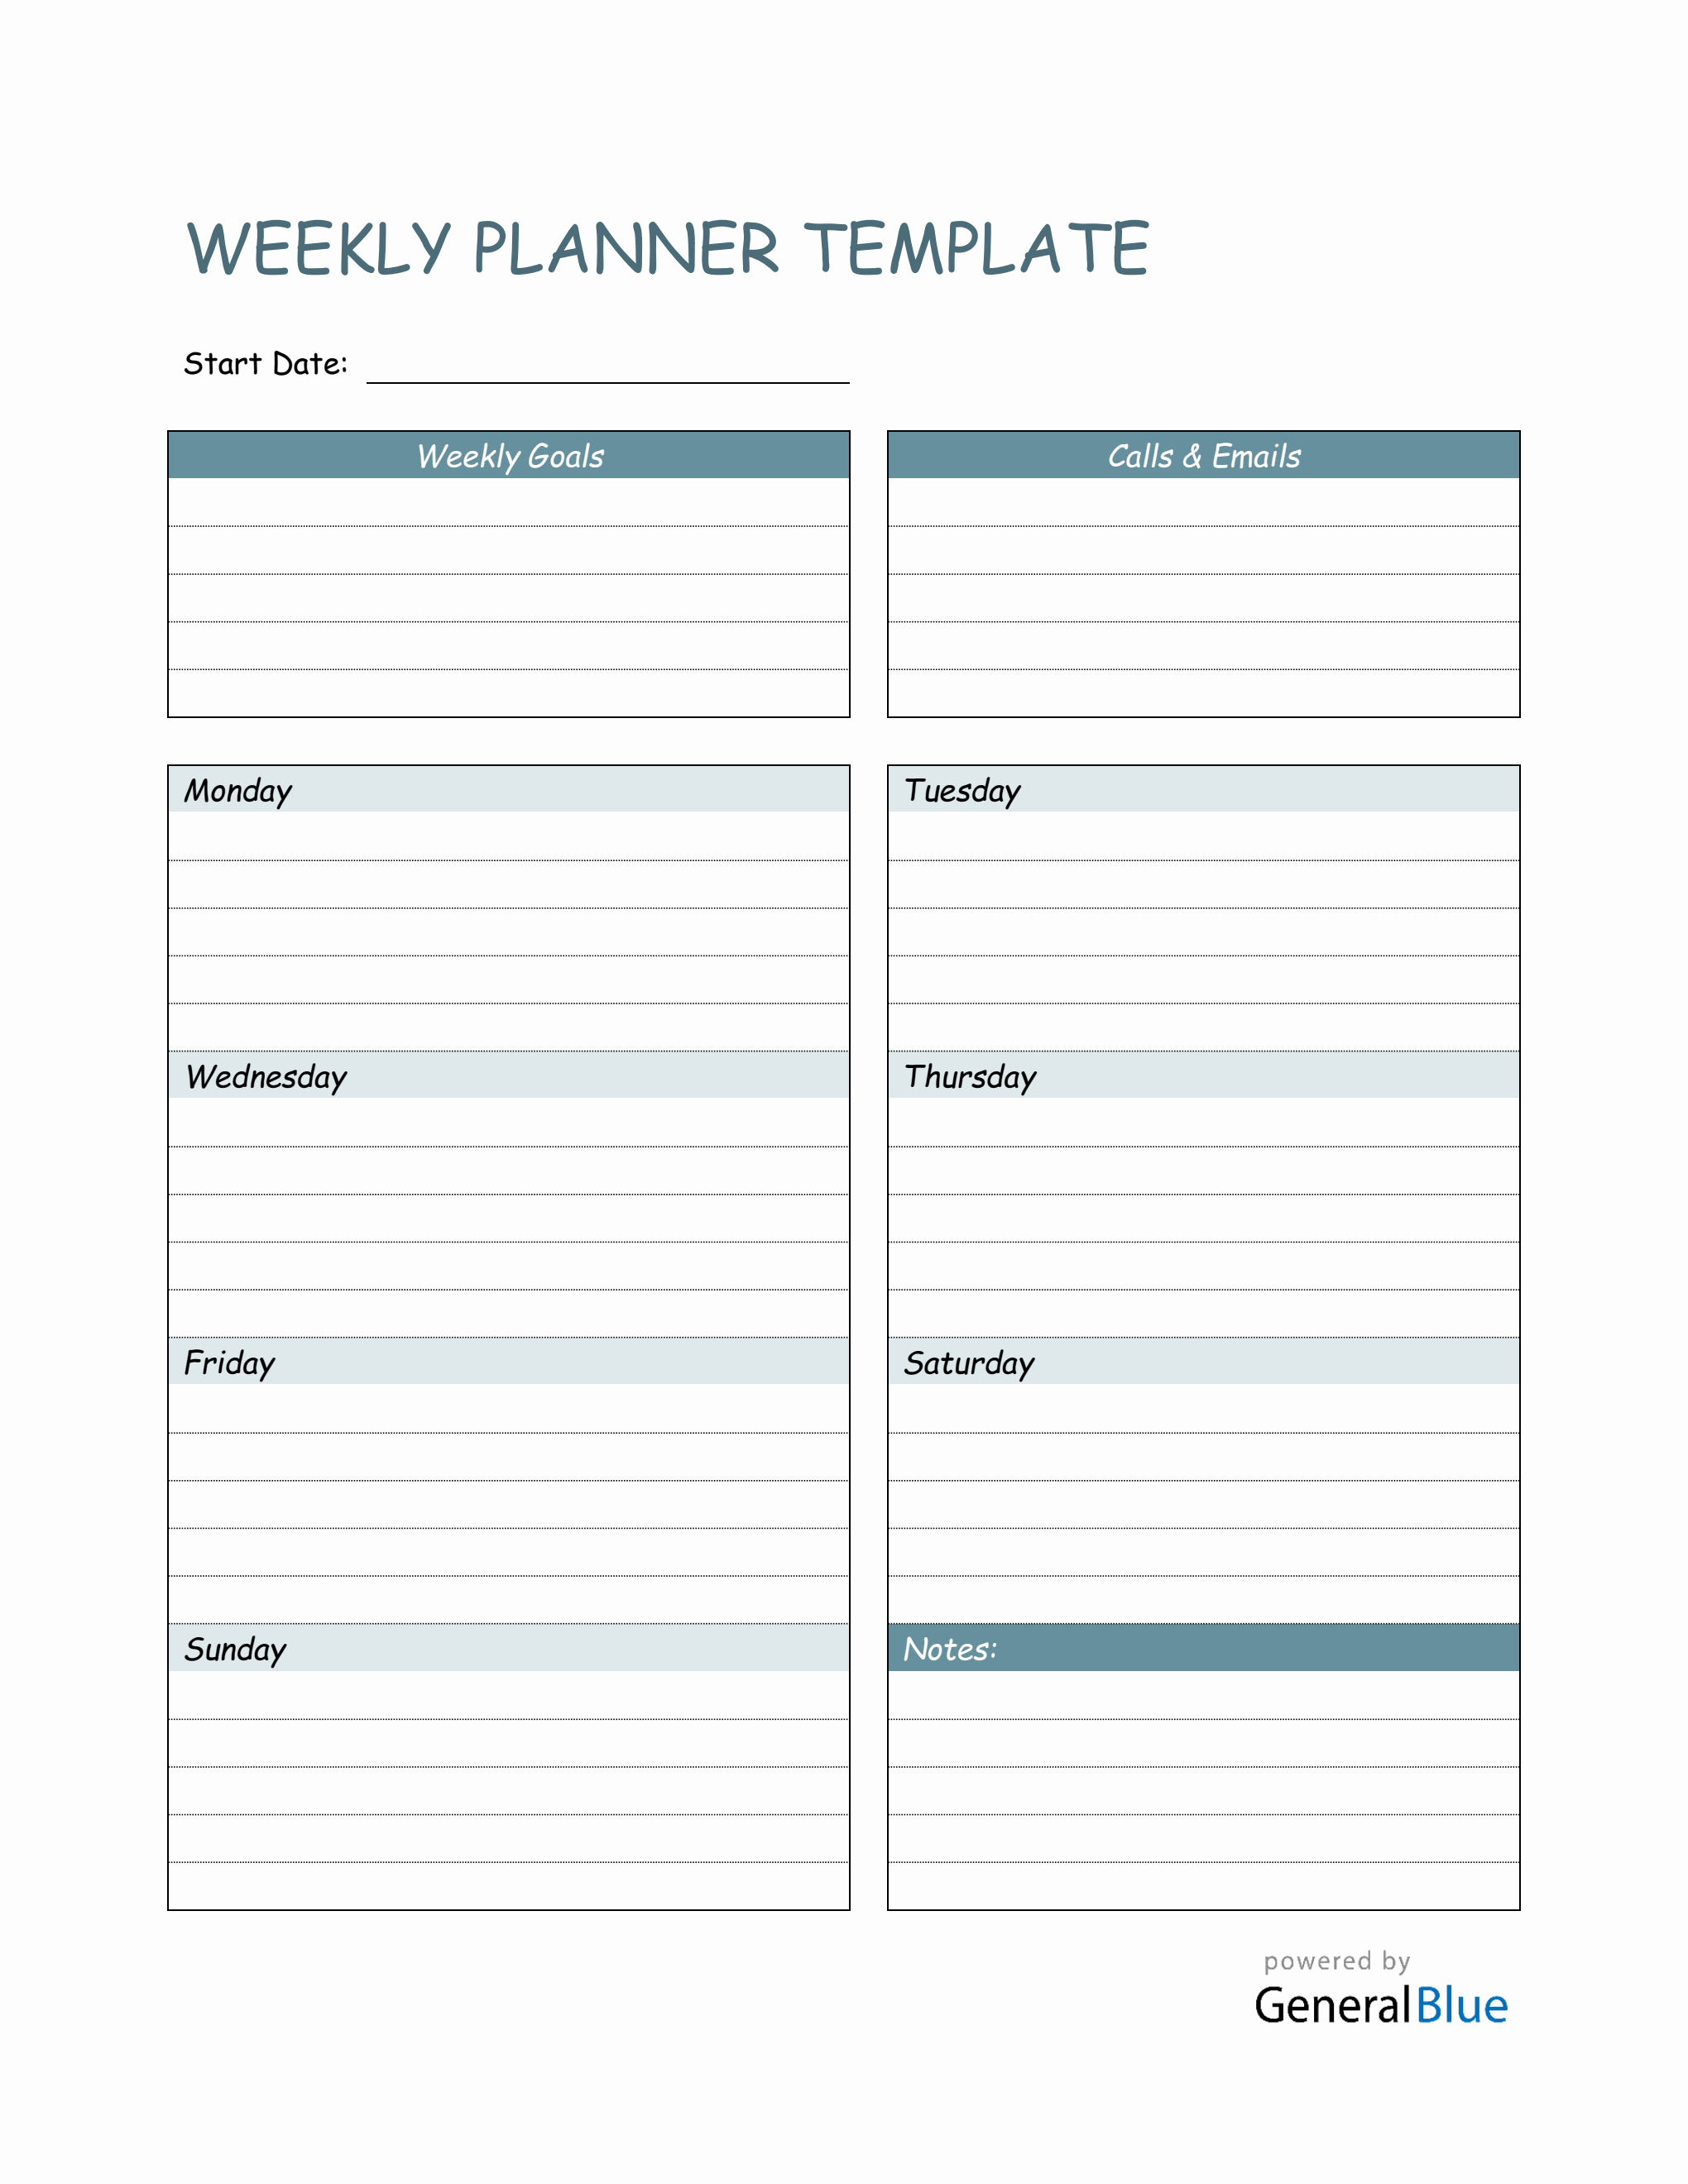 weekly-planner-templates-professional-word-templates-riset